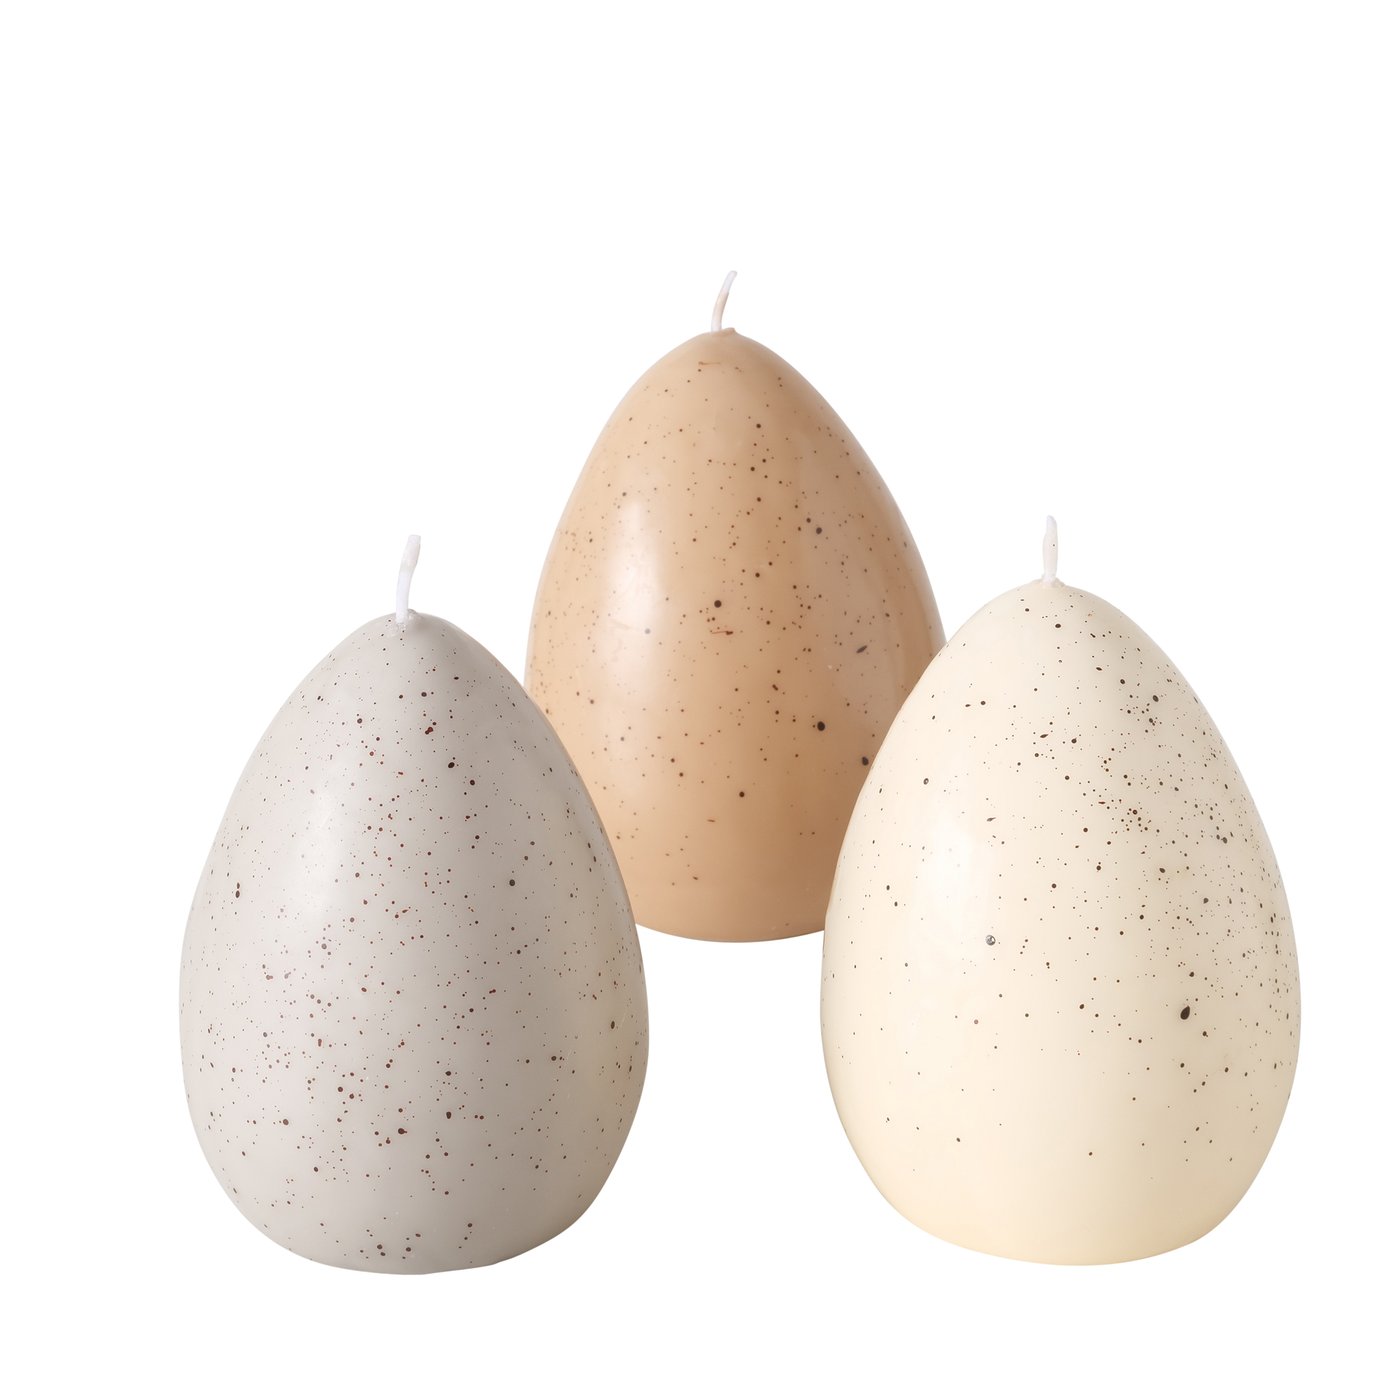 &Quirky Springtime Speckled Egg Candles : Brown, Grey or Cream White